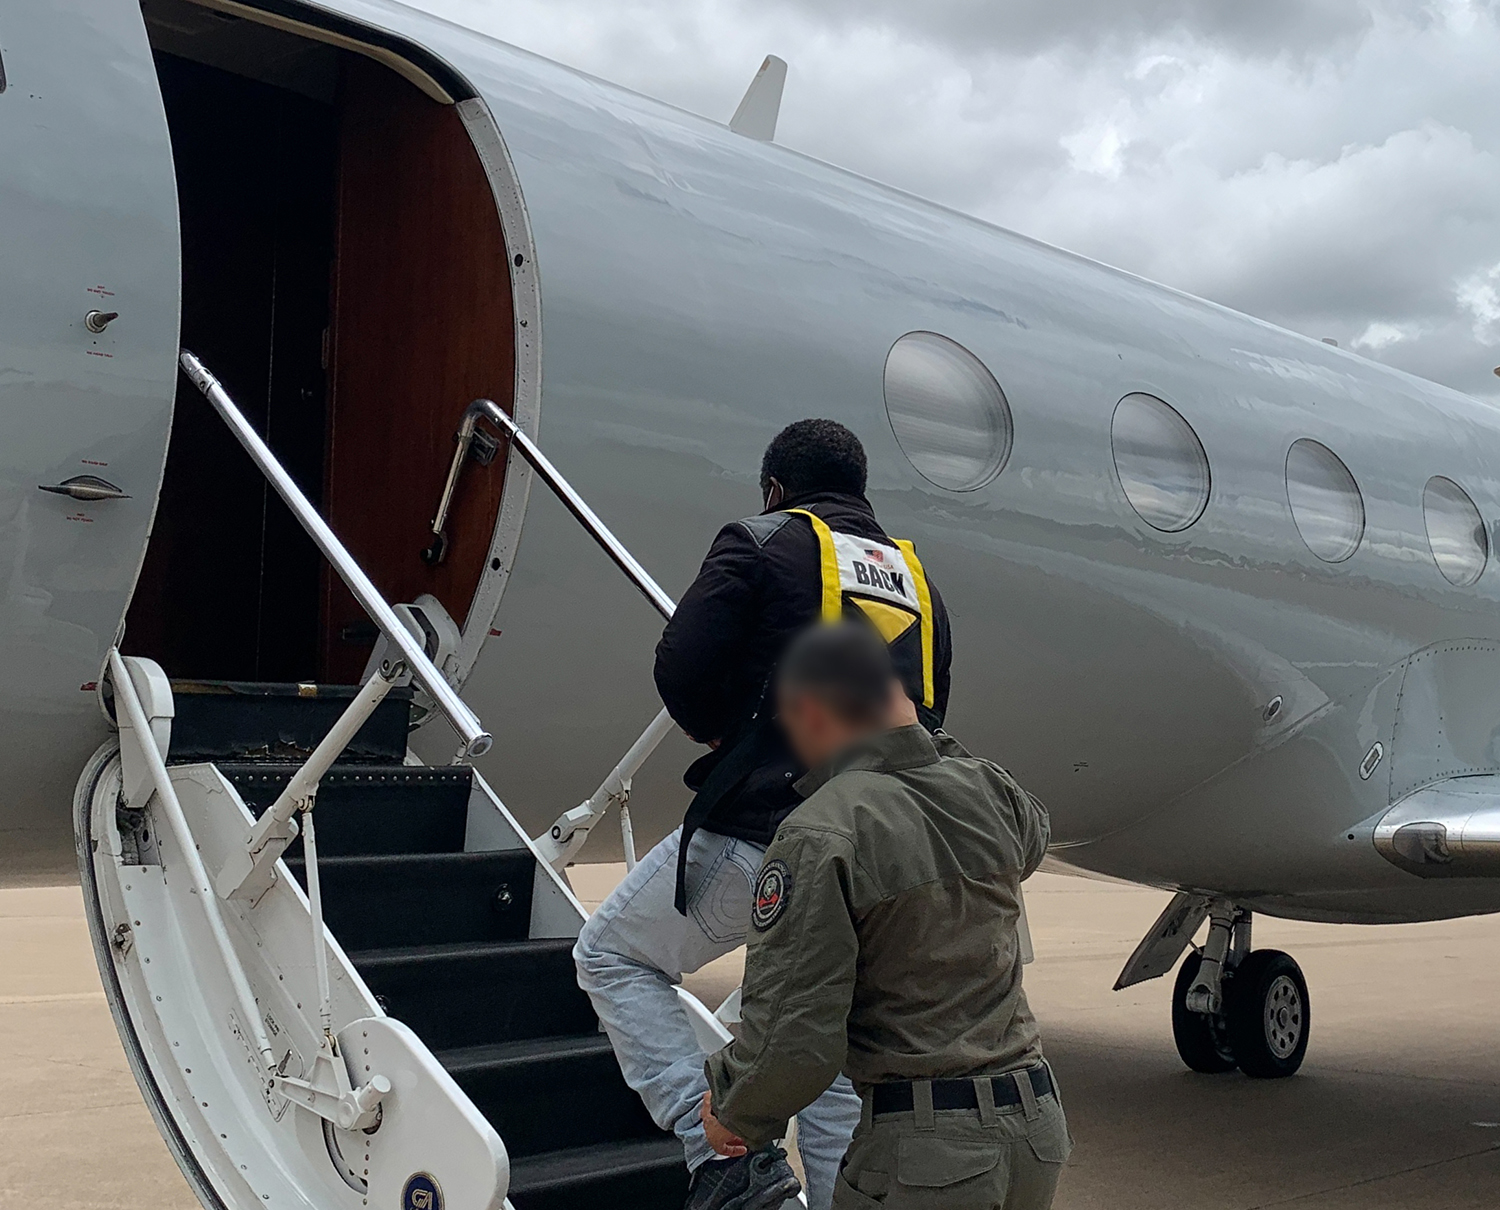 Eddie Yenner Murphy Karpoleh was flown from Saint Paul to Liberia on a flight coordinated by ICE’s Air Operations Unit